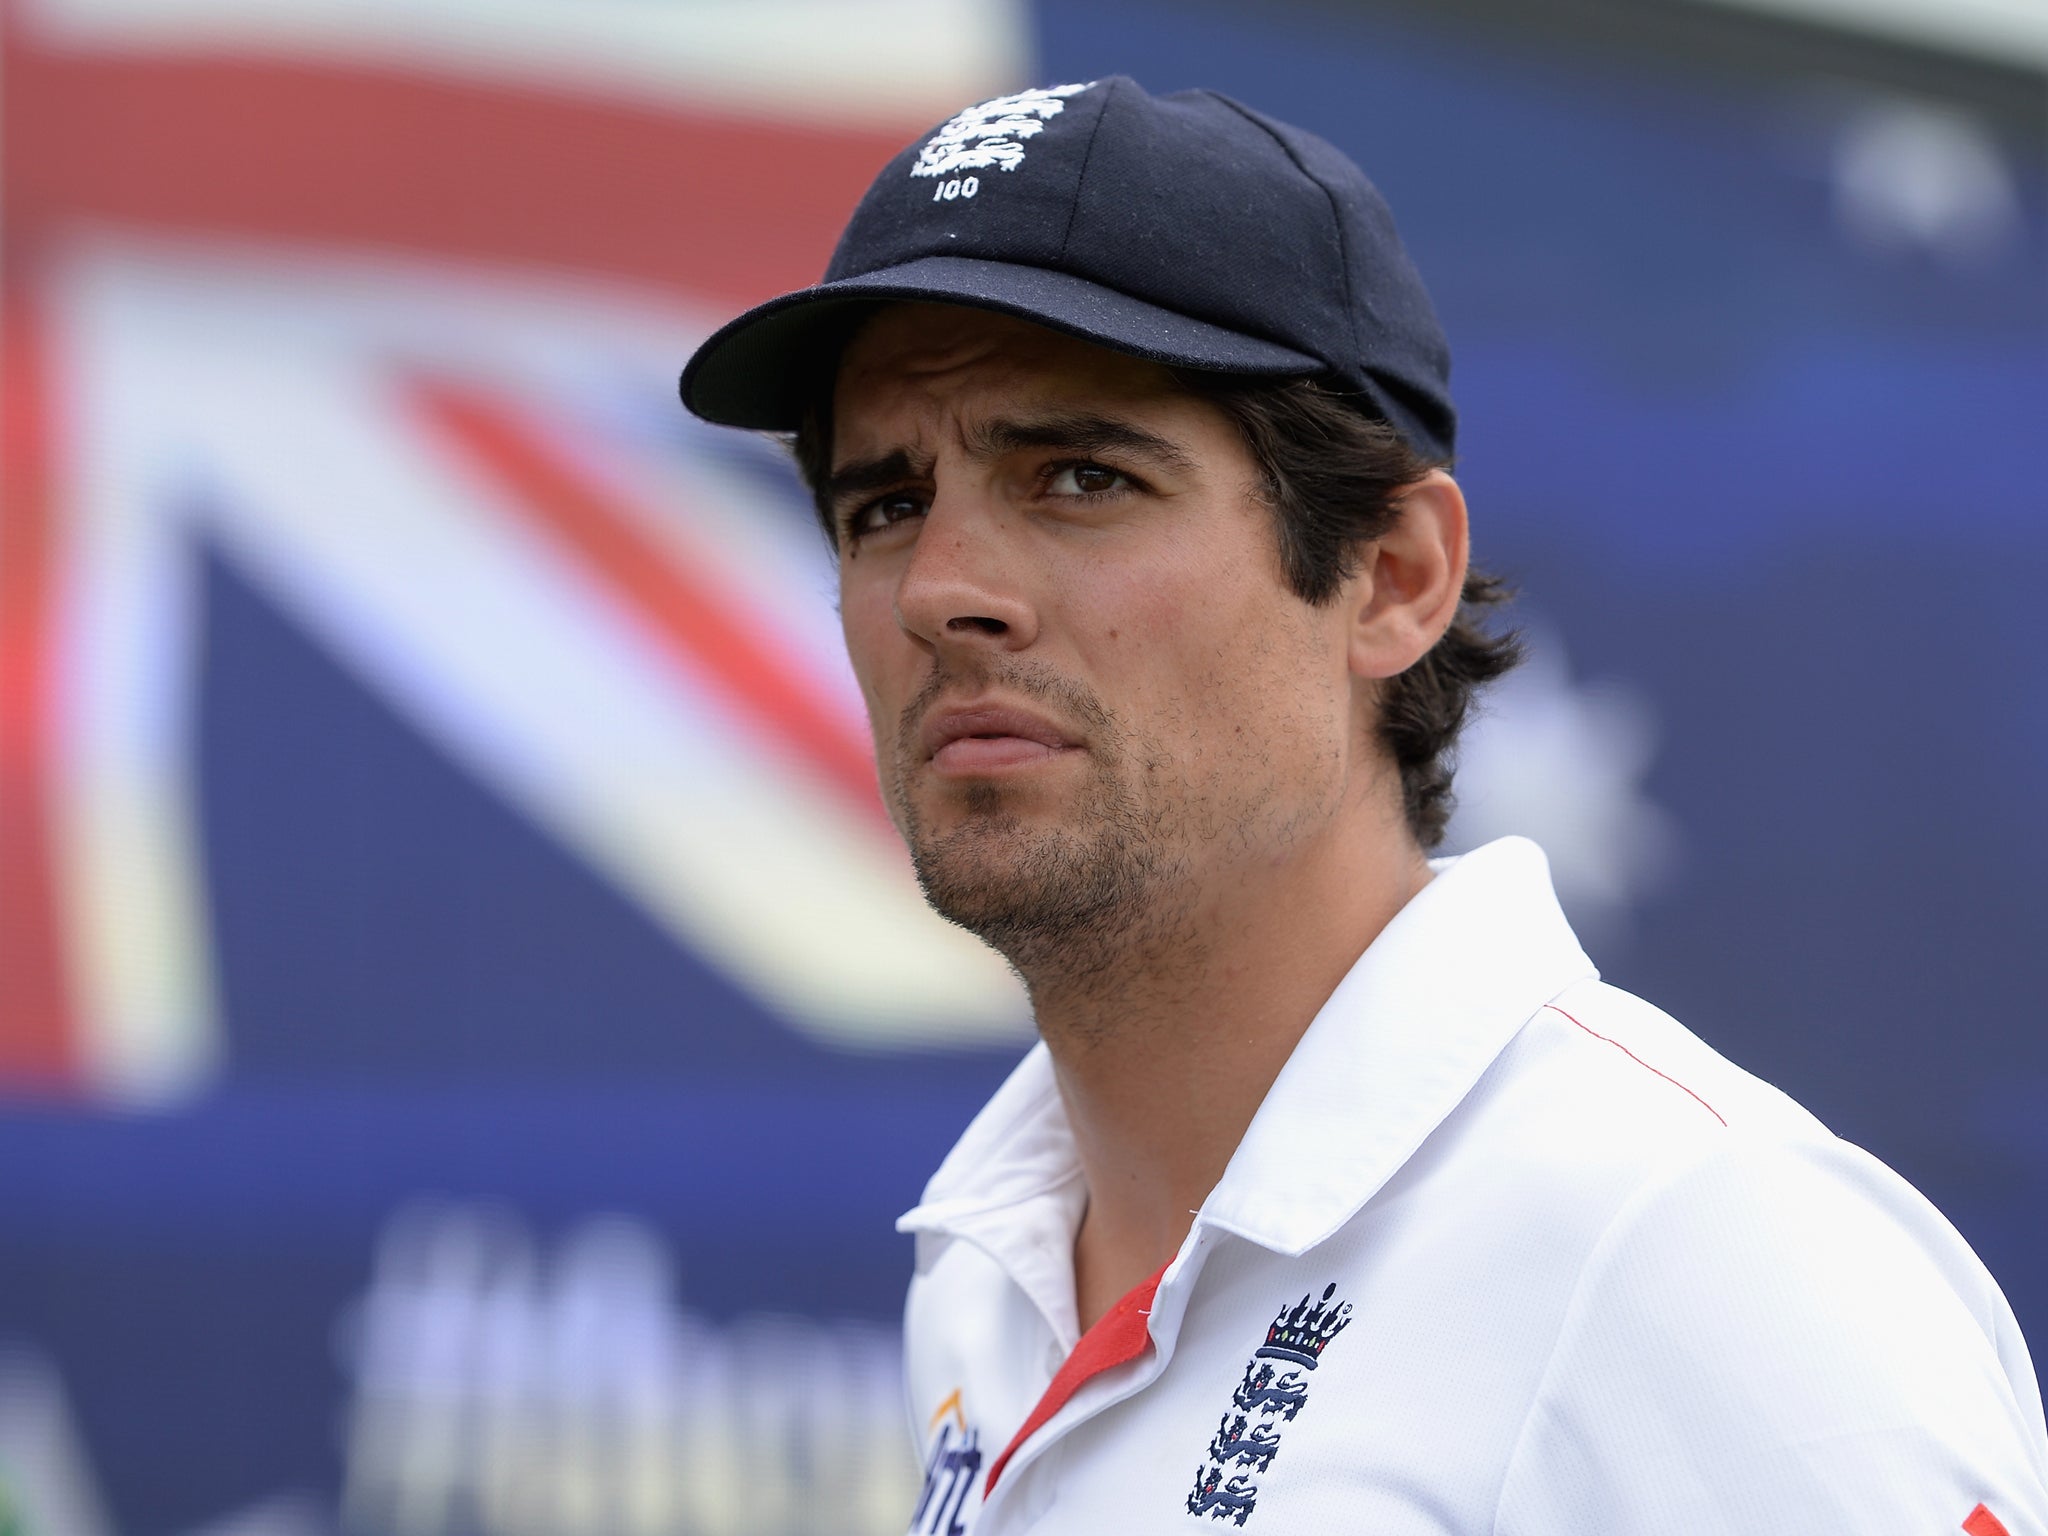 Birthday boy Alastair Cook has a pressing Christmas wish, to stop Australia's bid for another Ashes whitewash